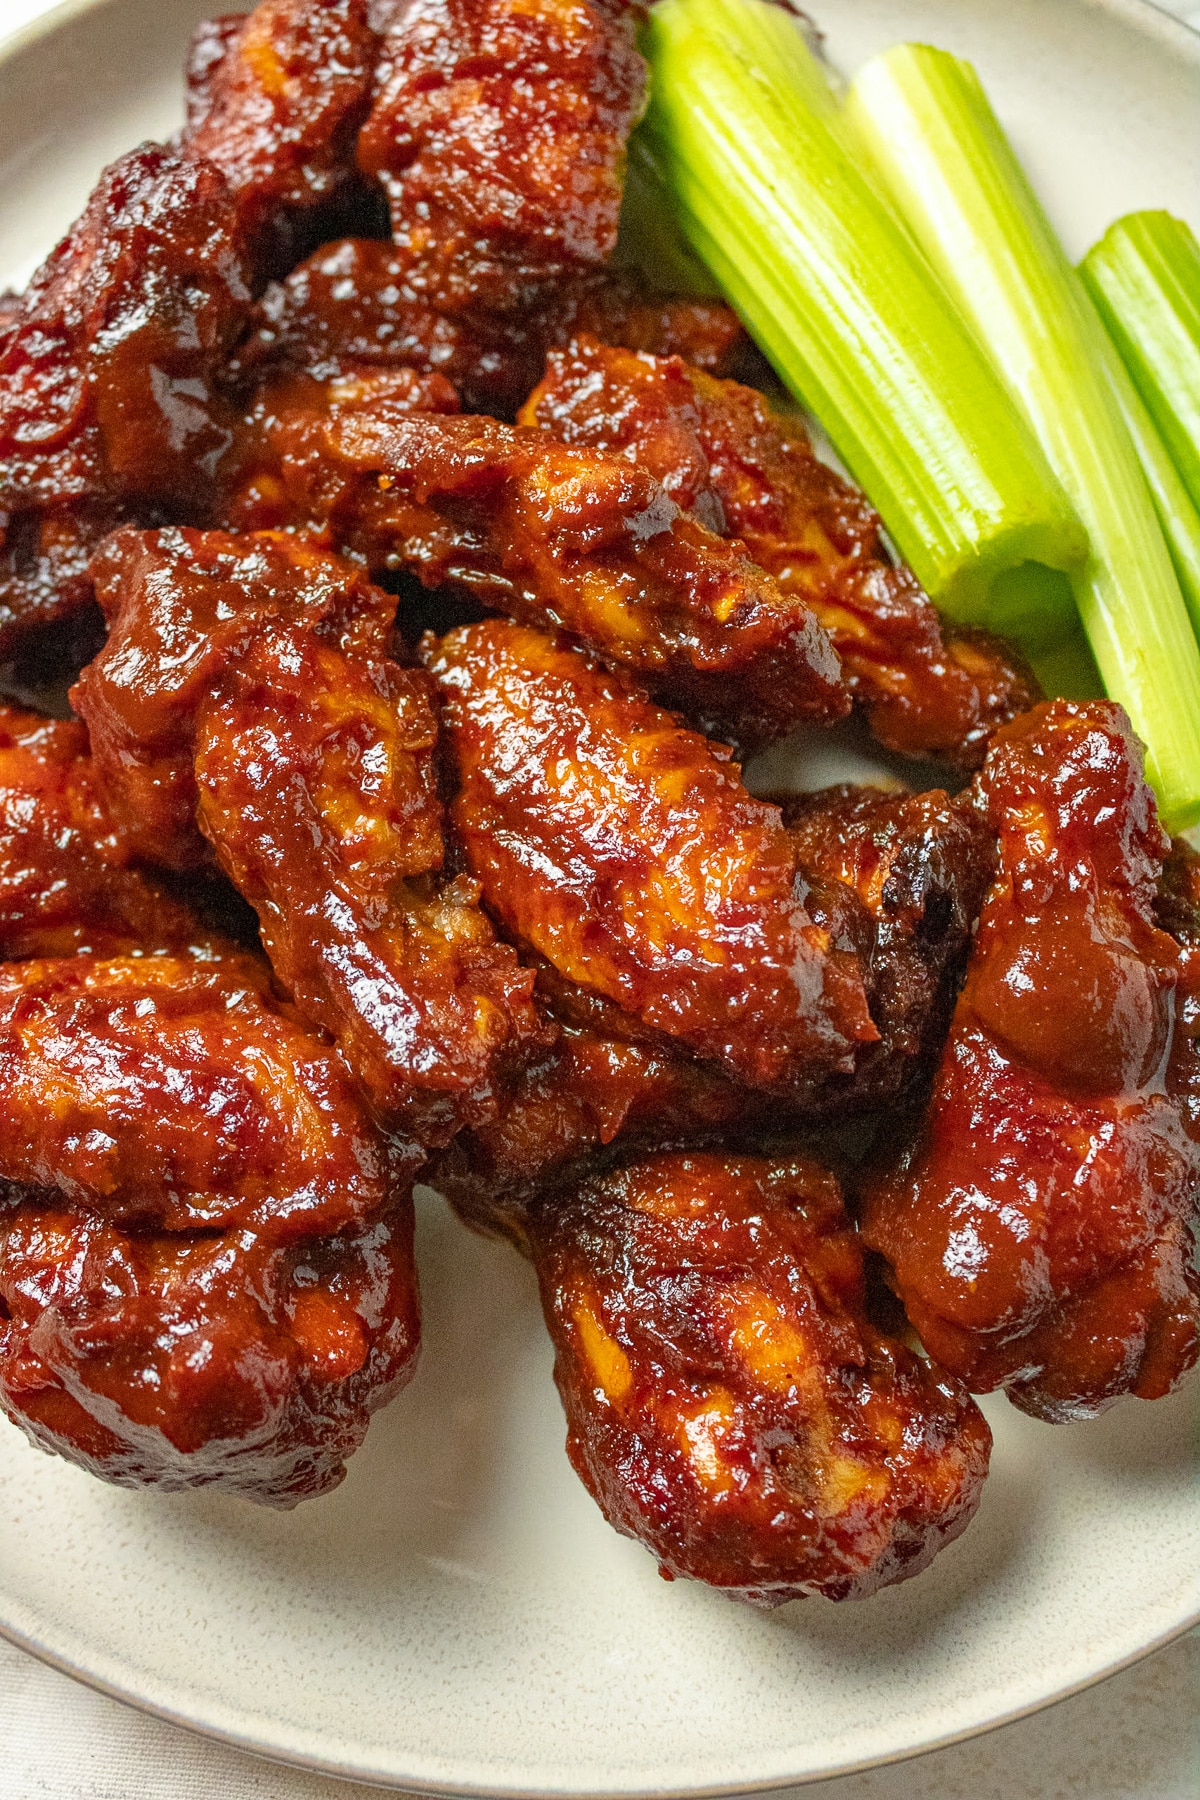 BBQ wings on a plate with celery sticks.